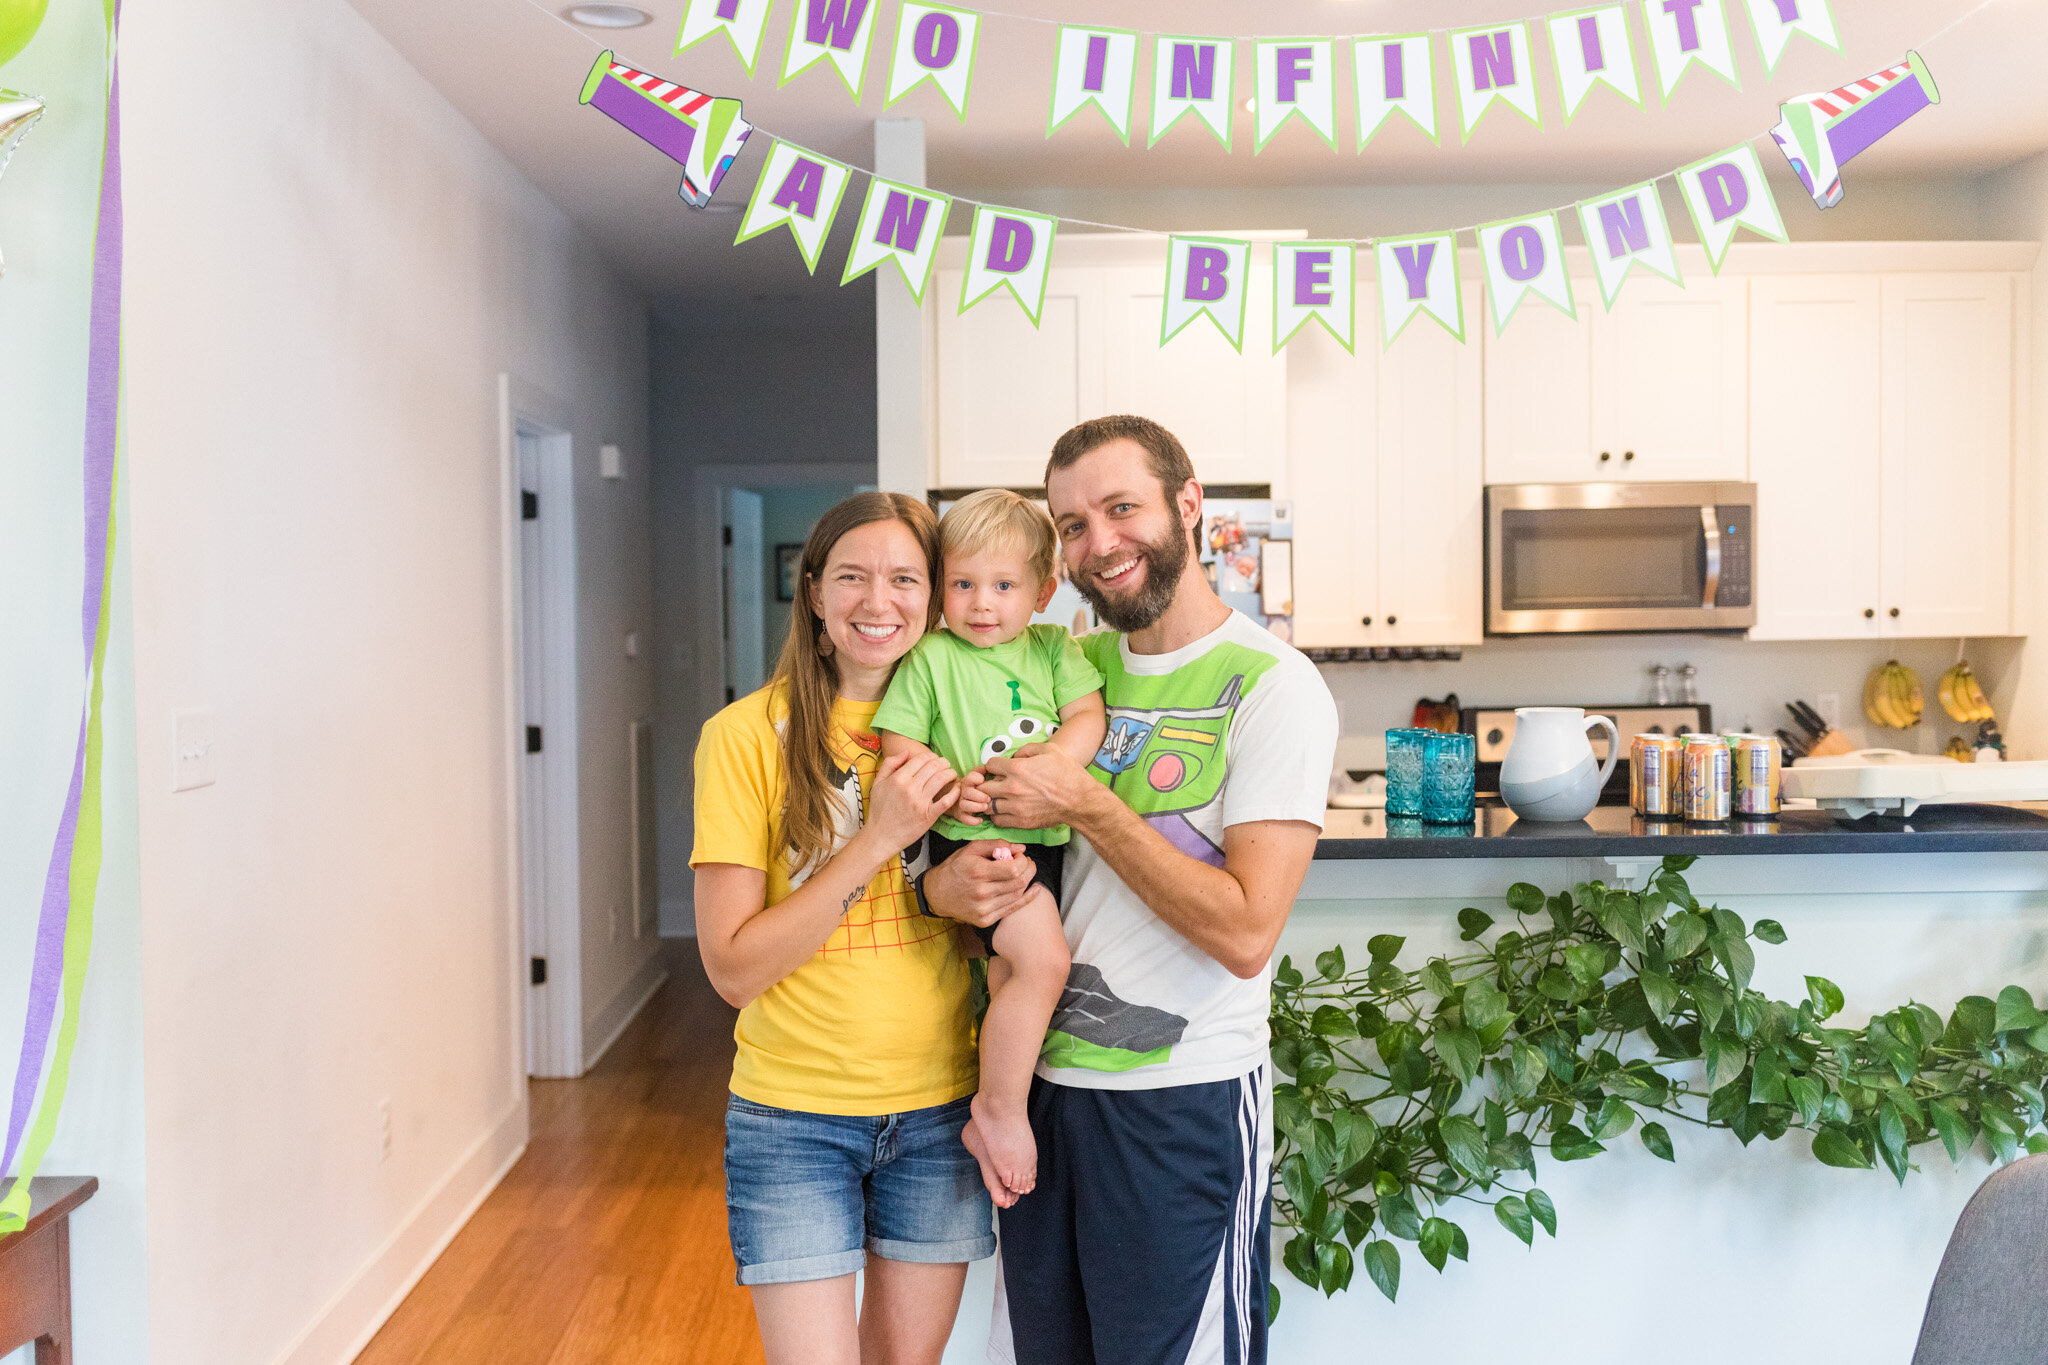 "Two Infinity and Beyond" Birthday Party Ideas! - Isaac's 2nd Birthday